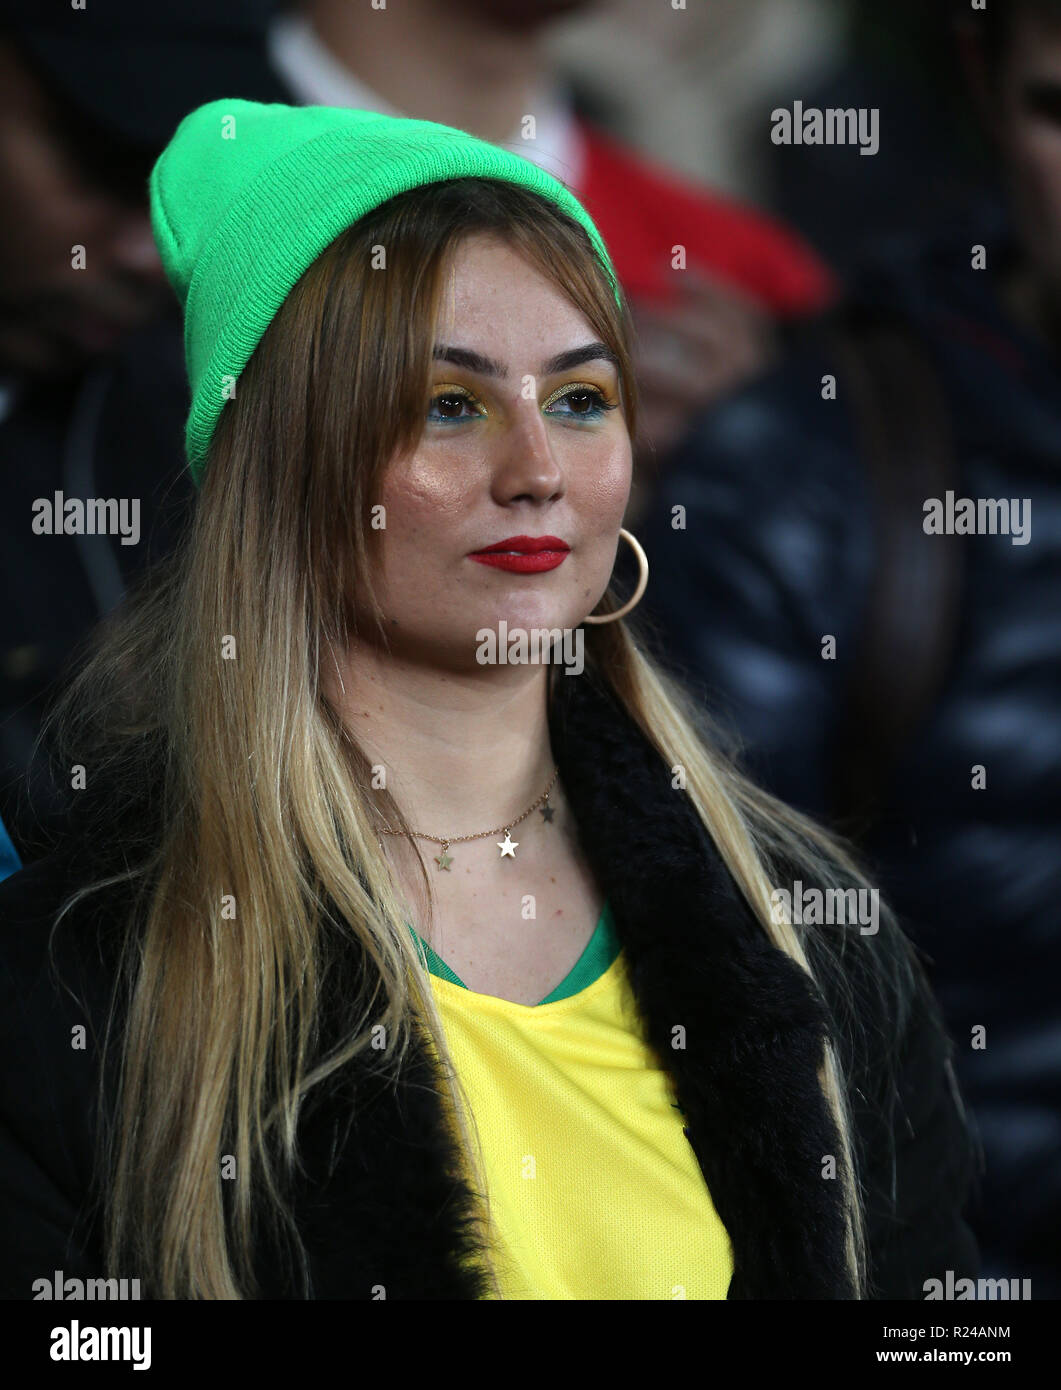 A fan in the stands prior to the International Friendly match at the Emirates Stadium, London. PRESS ASSOCIATION Photo. Picture date: Friday November 16, 2018. See PA story SOCCER Brazil. Photo credit should read: Steven Paston/PA Wire Stock Photo